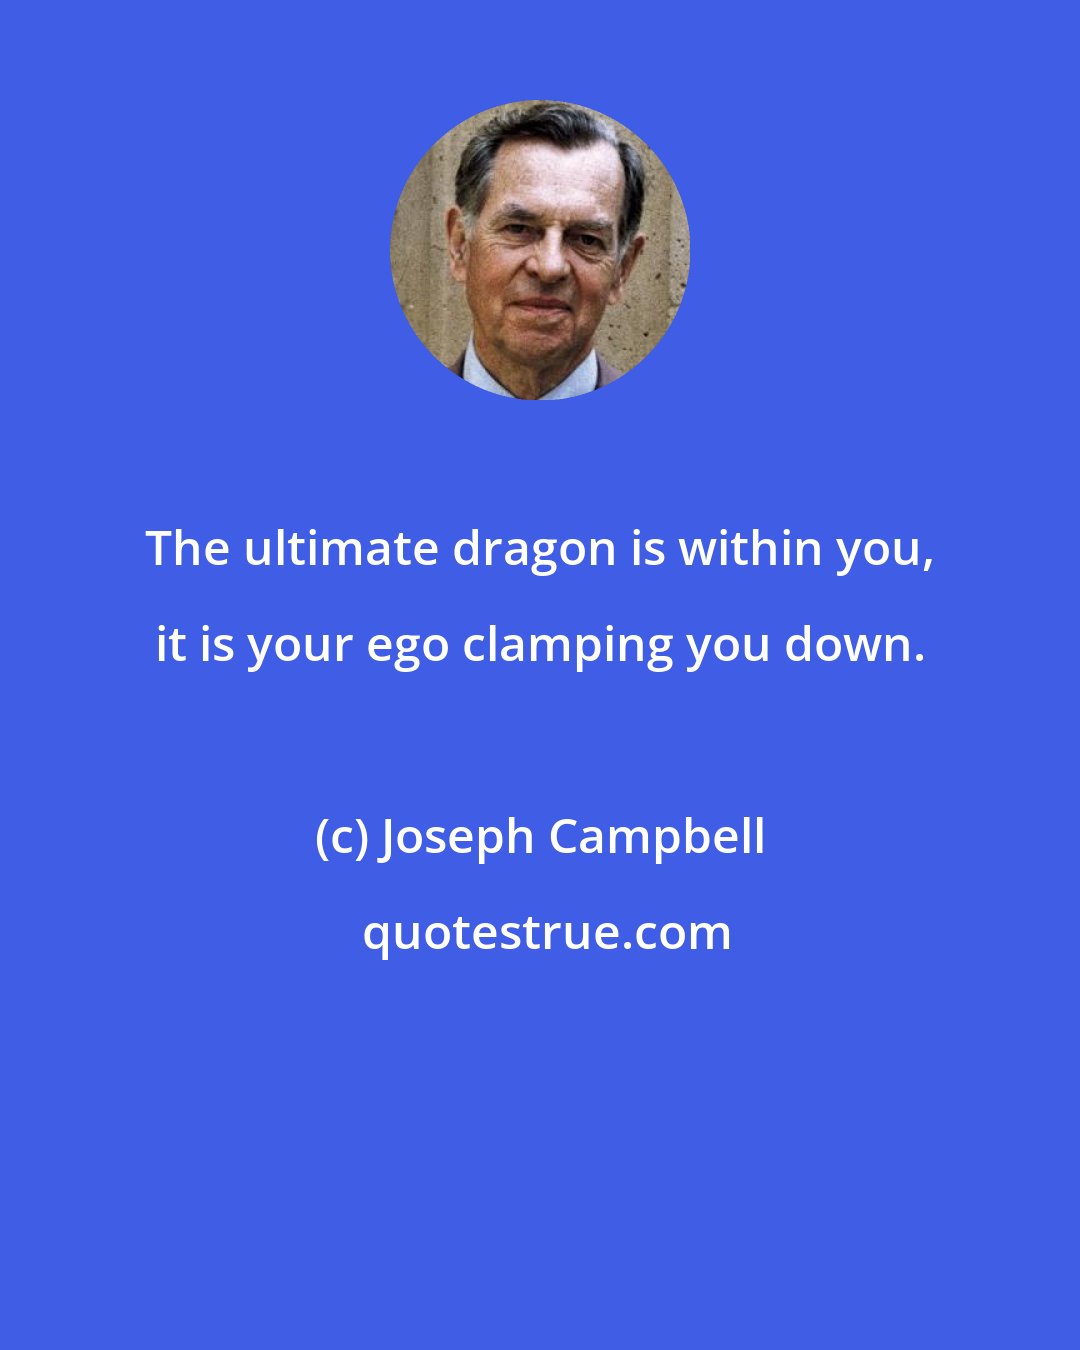 Joseph Campbell: The ultimate dragon is within you, it is your ego clamping you down.